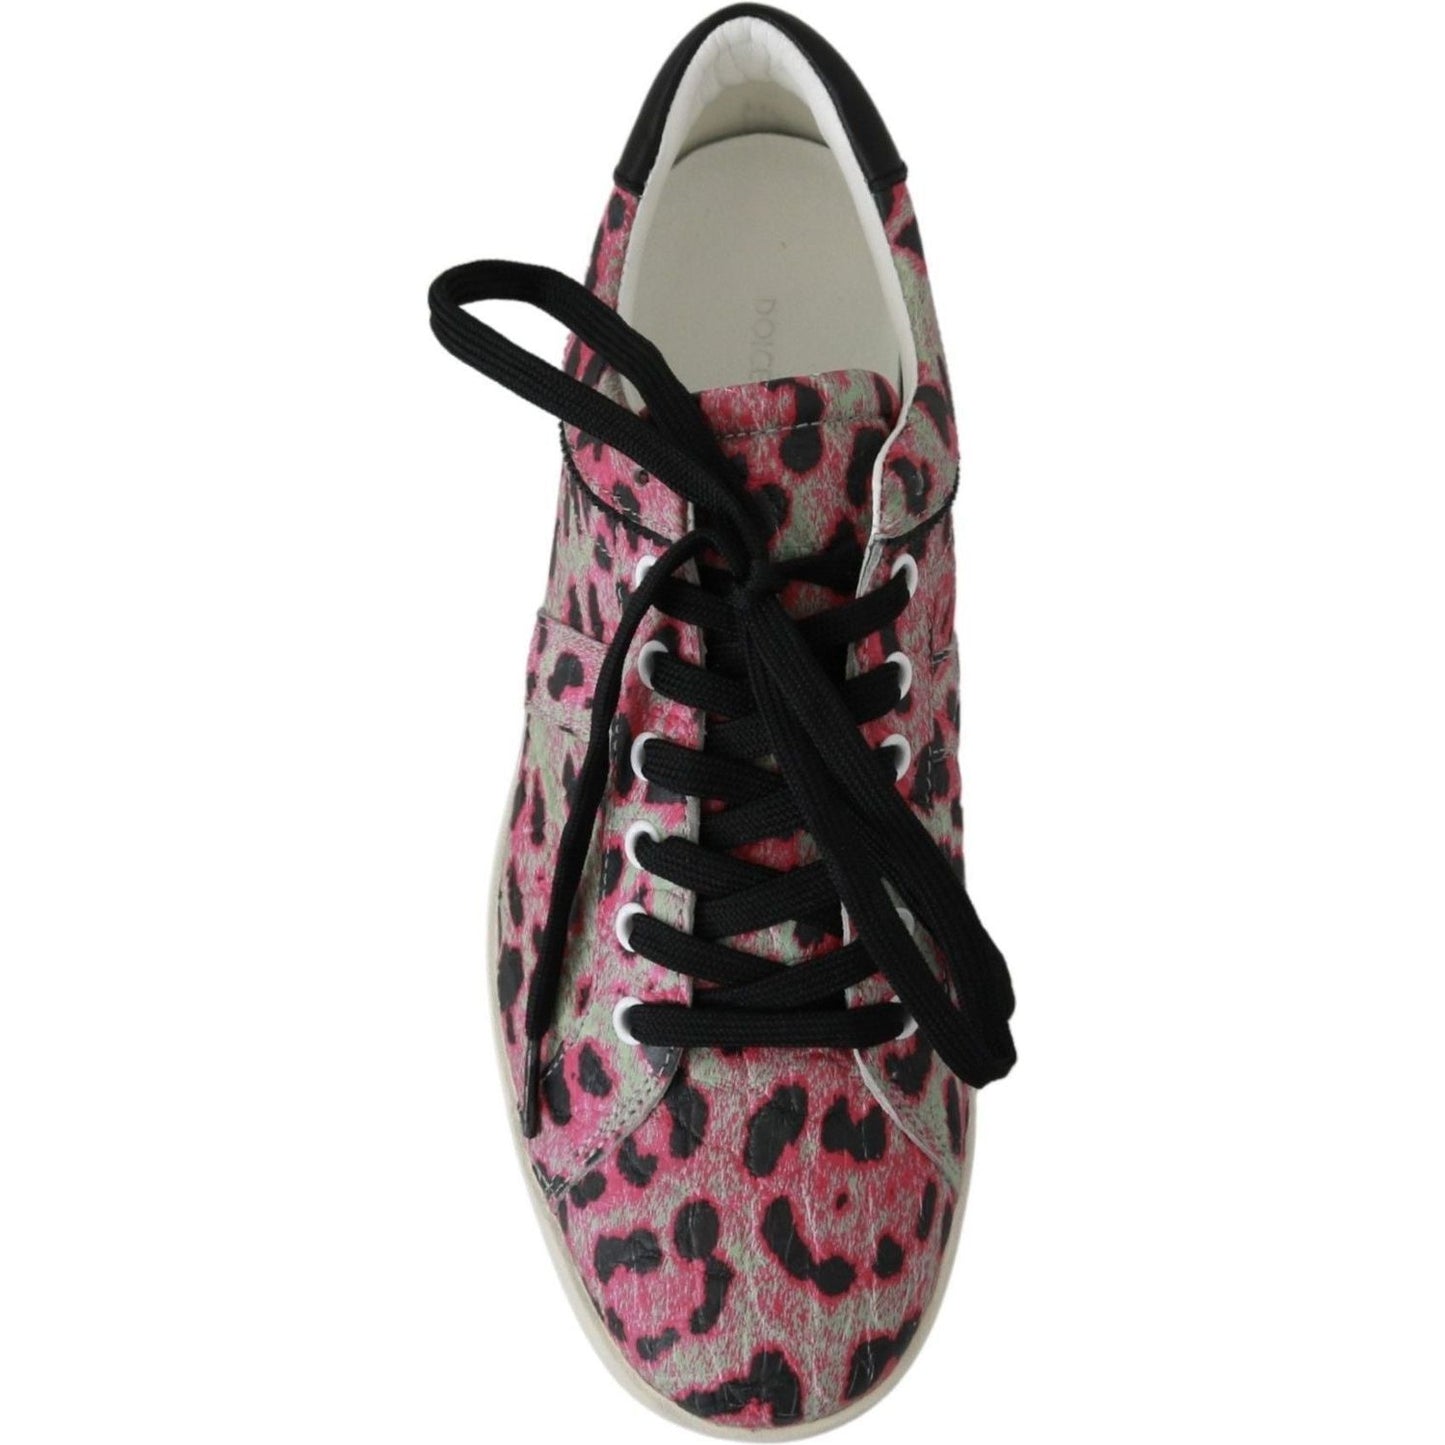 Dolce & Gabbana Multicolor Crocodile Leather Sneakers pink-leopard-print-training-leather-flat-sneakers IMG_9744-1-13450872-c8f.jpg